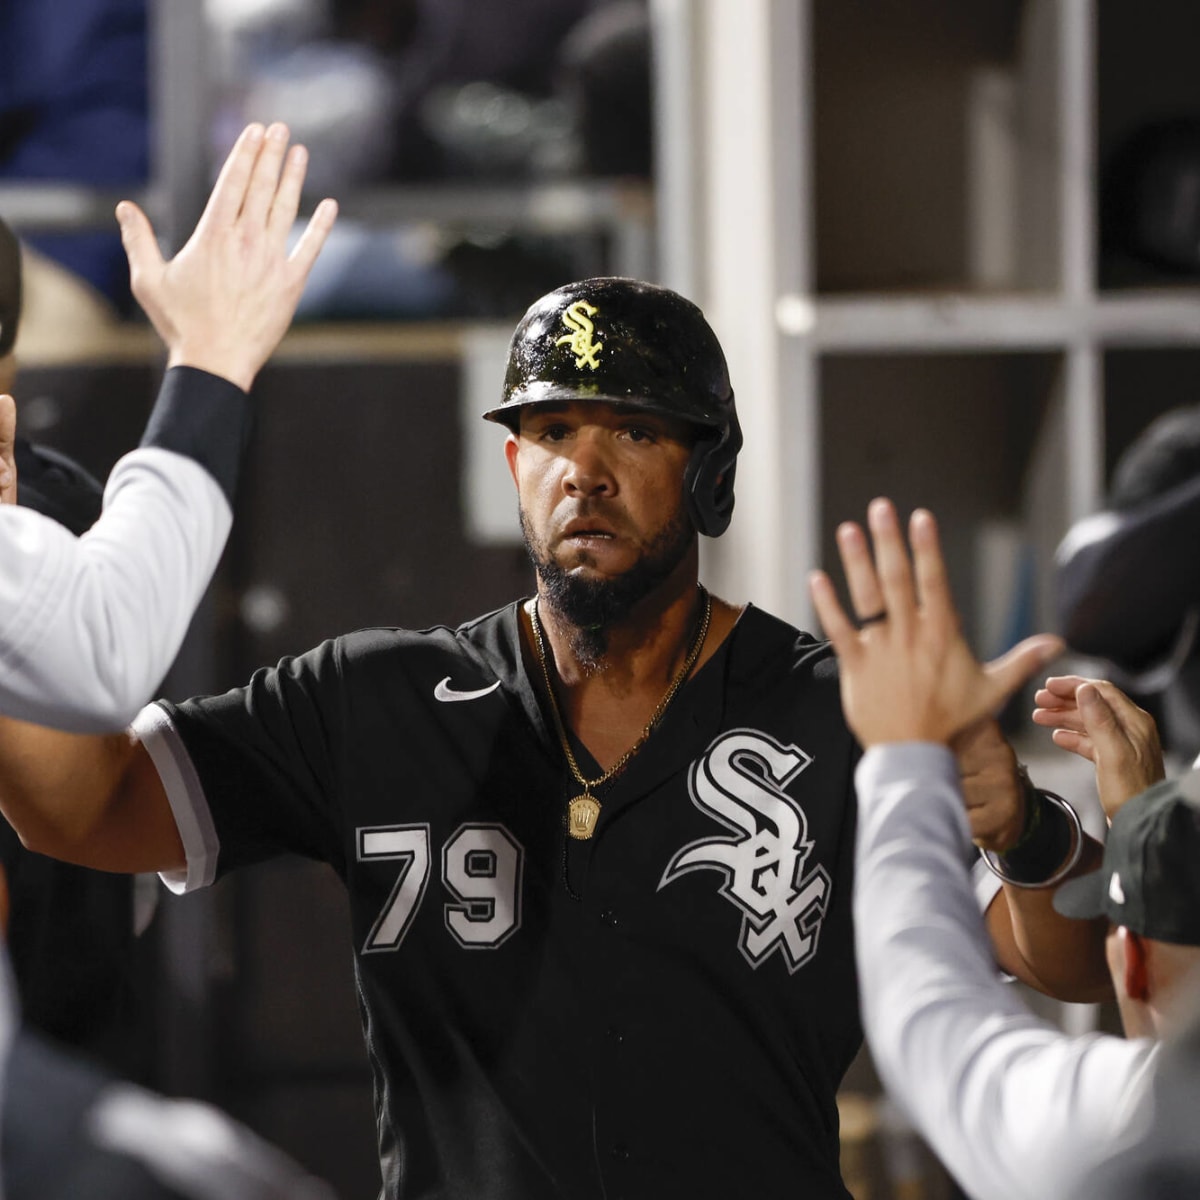 New White Sox 'City Connect' jerseys commemorated with Jose Abreu